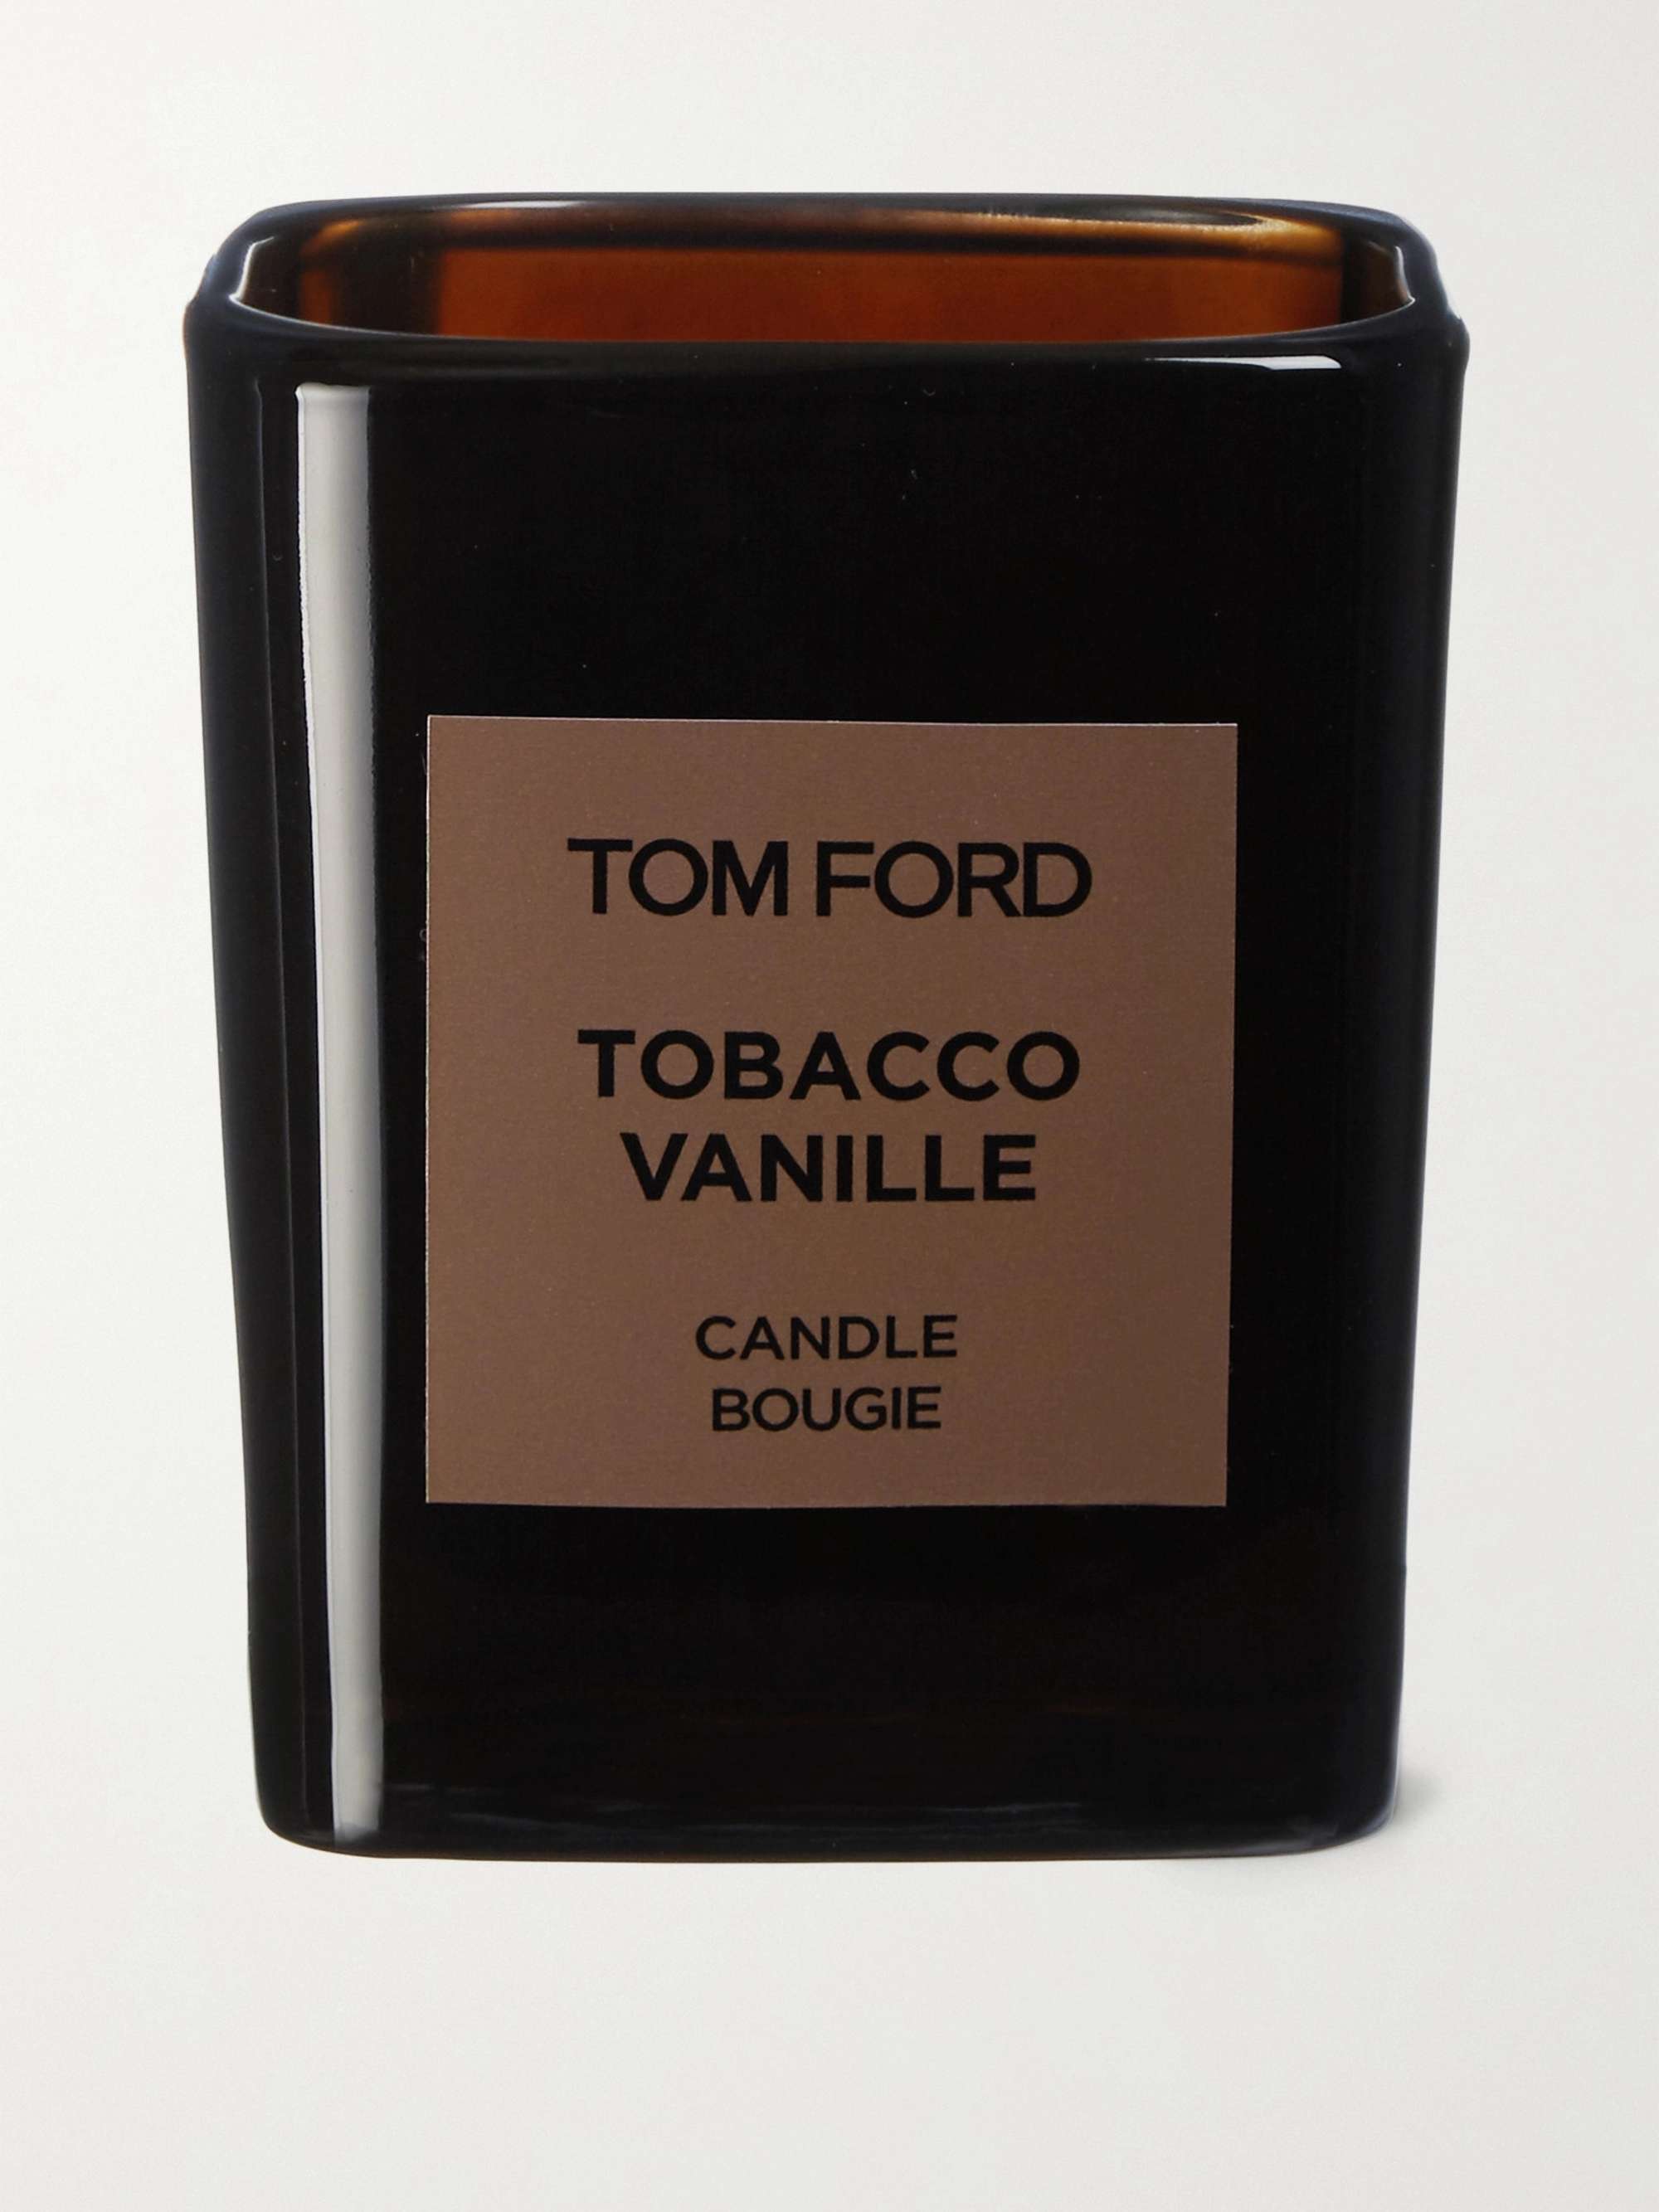 TOM FORD BEAUTY Tobacco Vanille Scented Candle, 200g